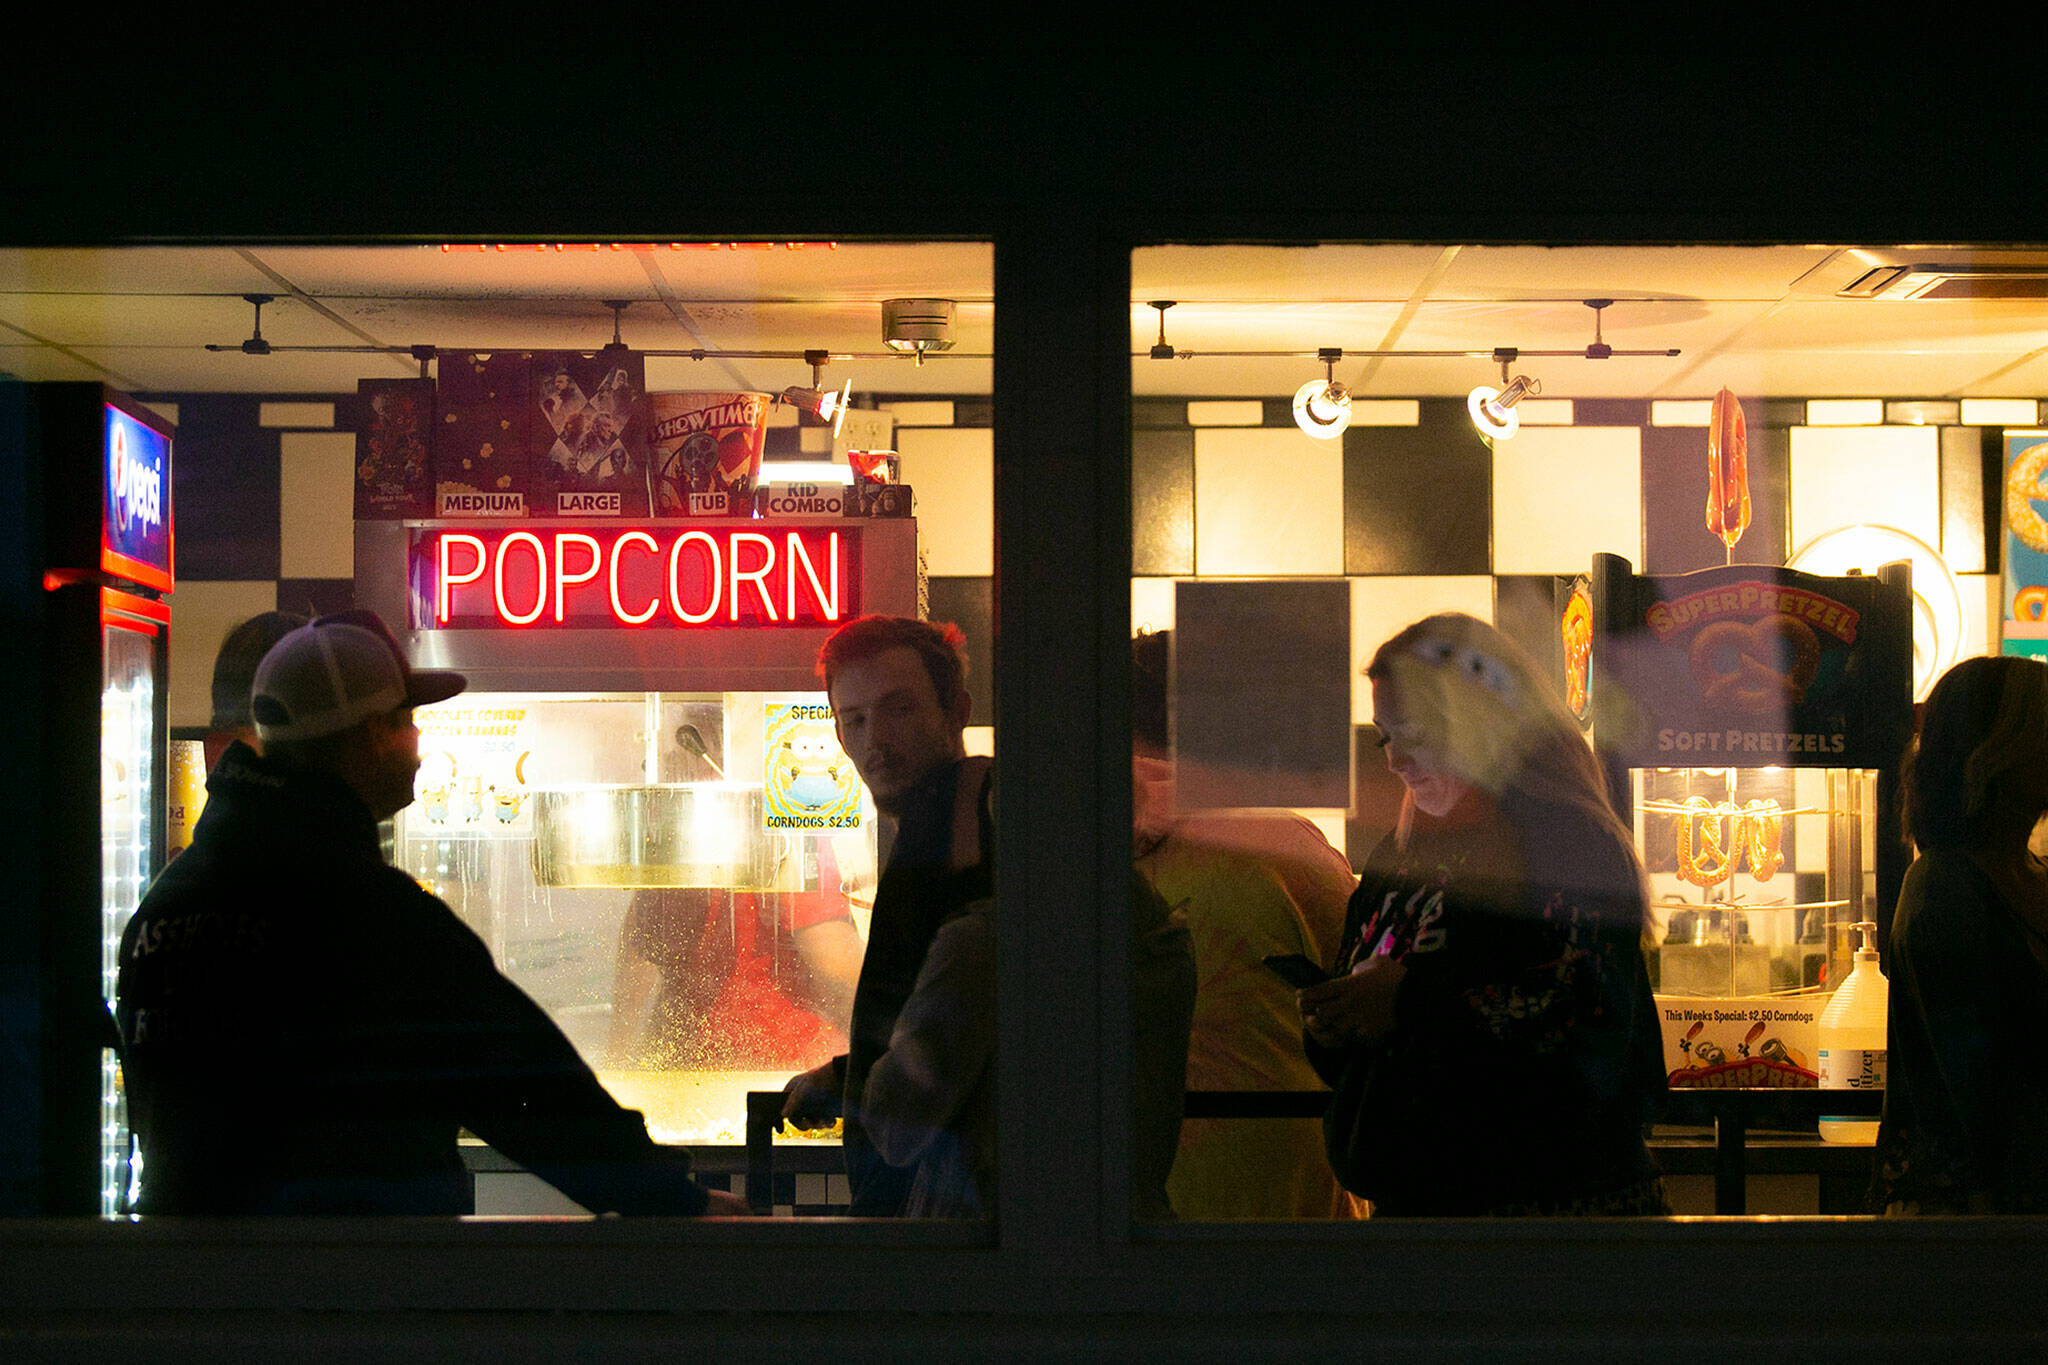 People wait in line for snacks at the Blue Fox Drive-In Theater in Oak Harbor. (Ryan Berry / The Herald)